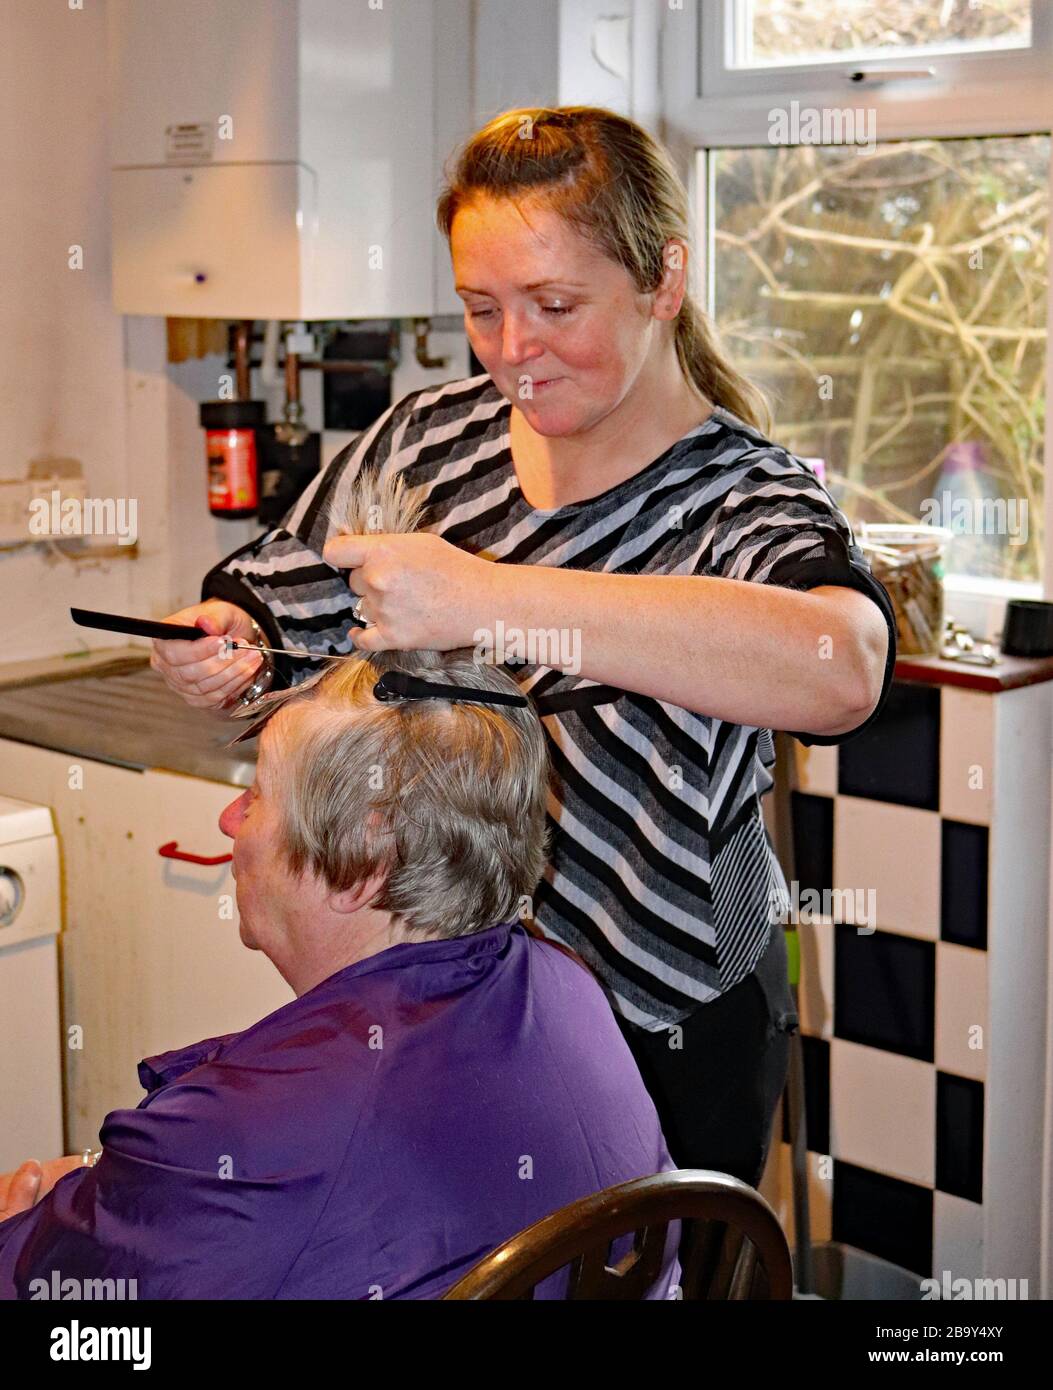 A mobile hair dresser working in a client’s home. Karen Mellor is a hair stylist who works around West Lancashire and is colouring the client’s hair. Stock Photo